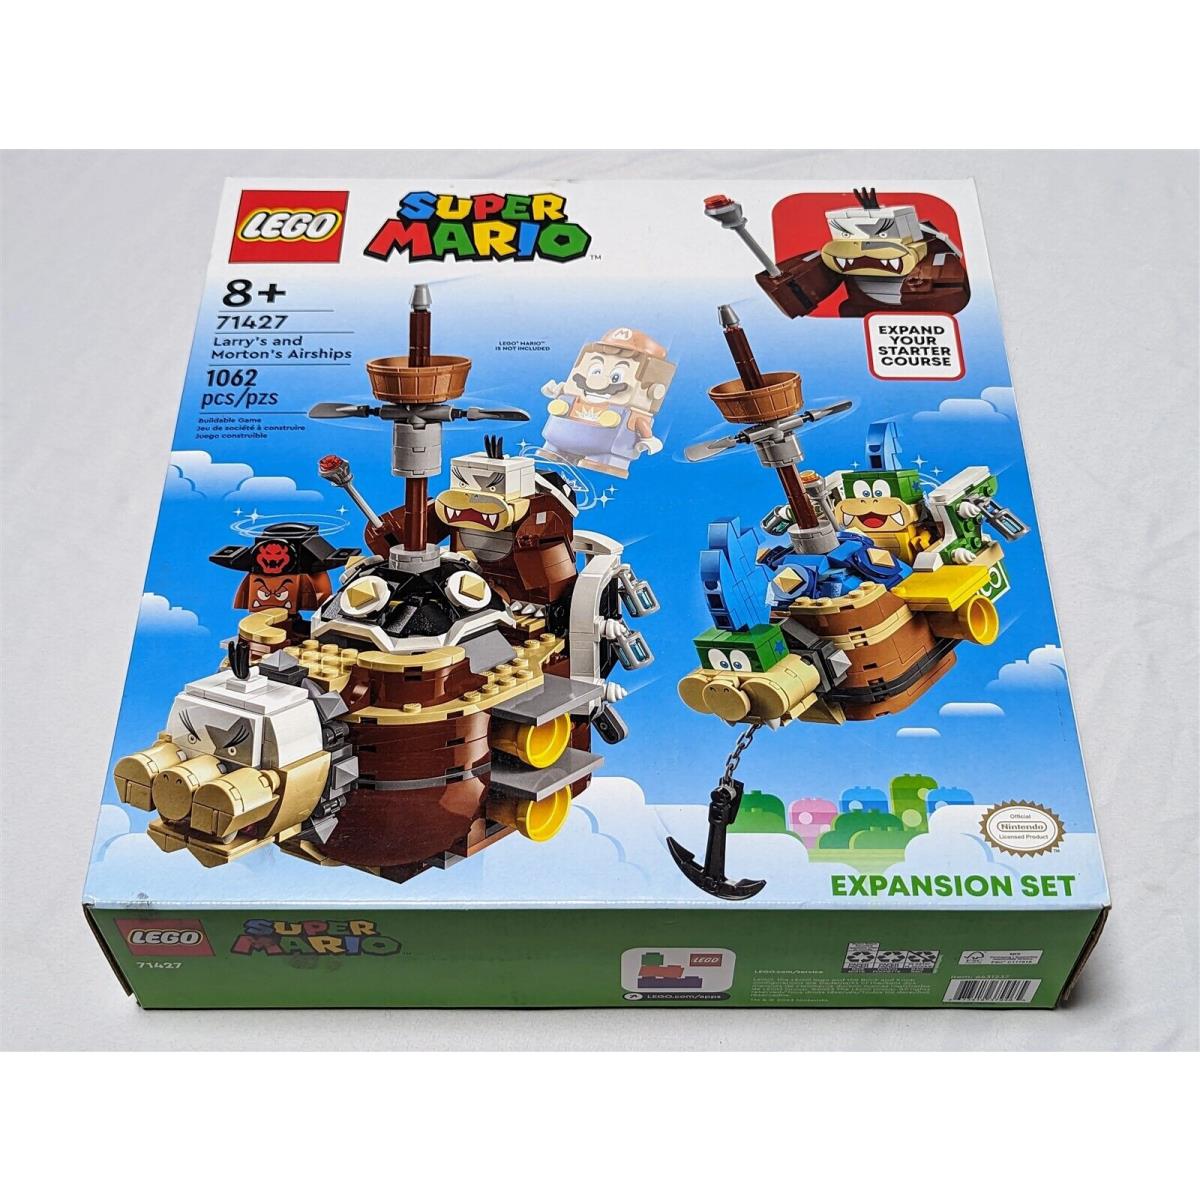 Lego 71427 Super Mario Larry s and Morton s Airships Buildable Expansion Toy Set